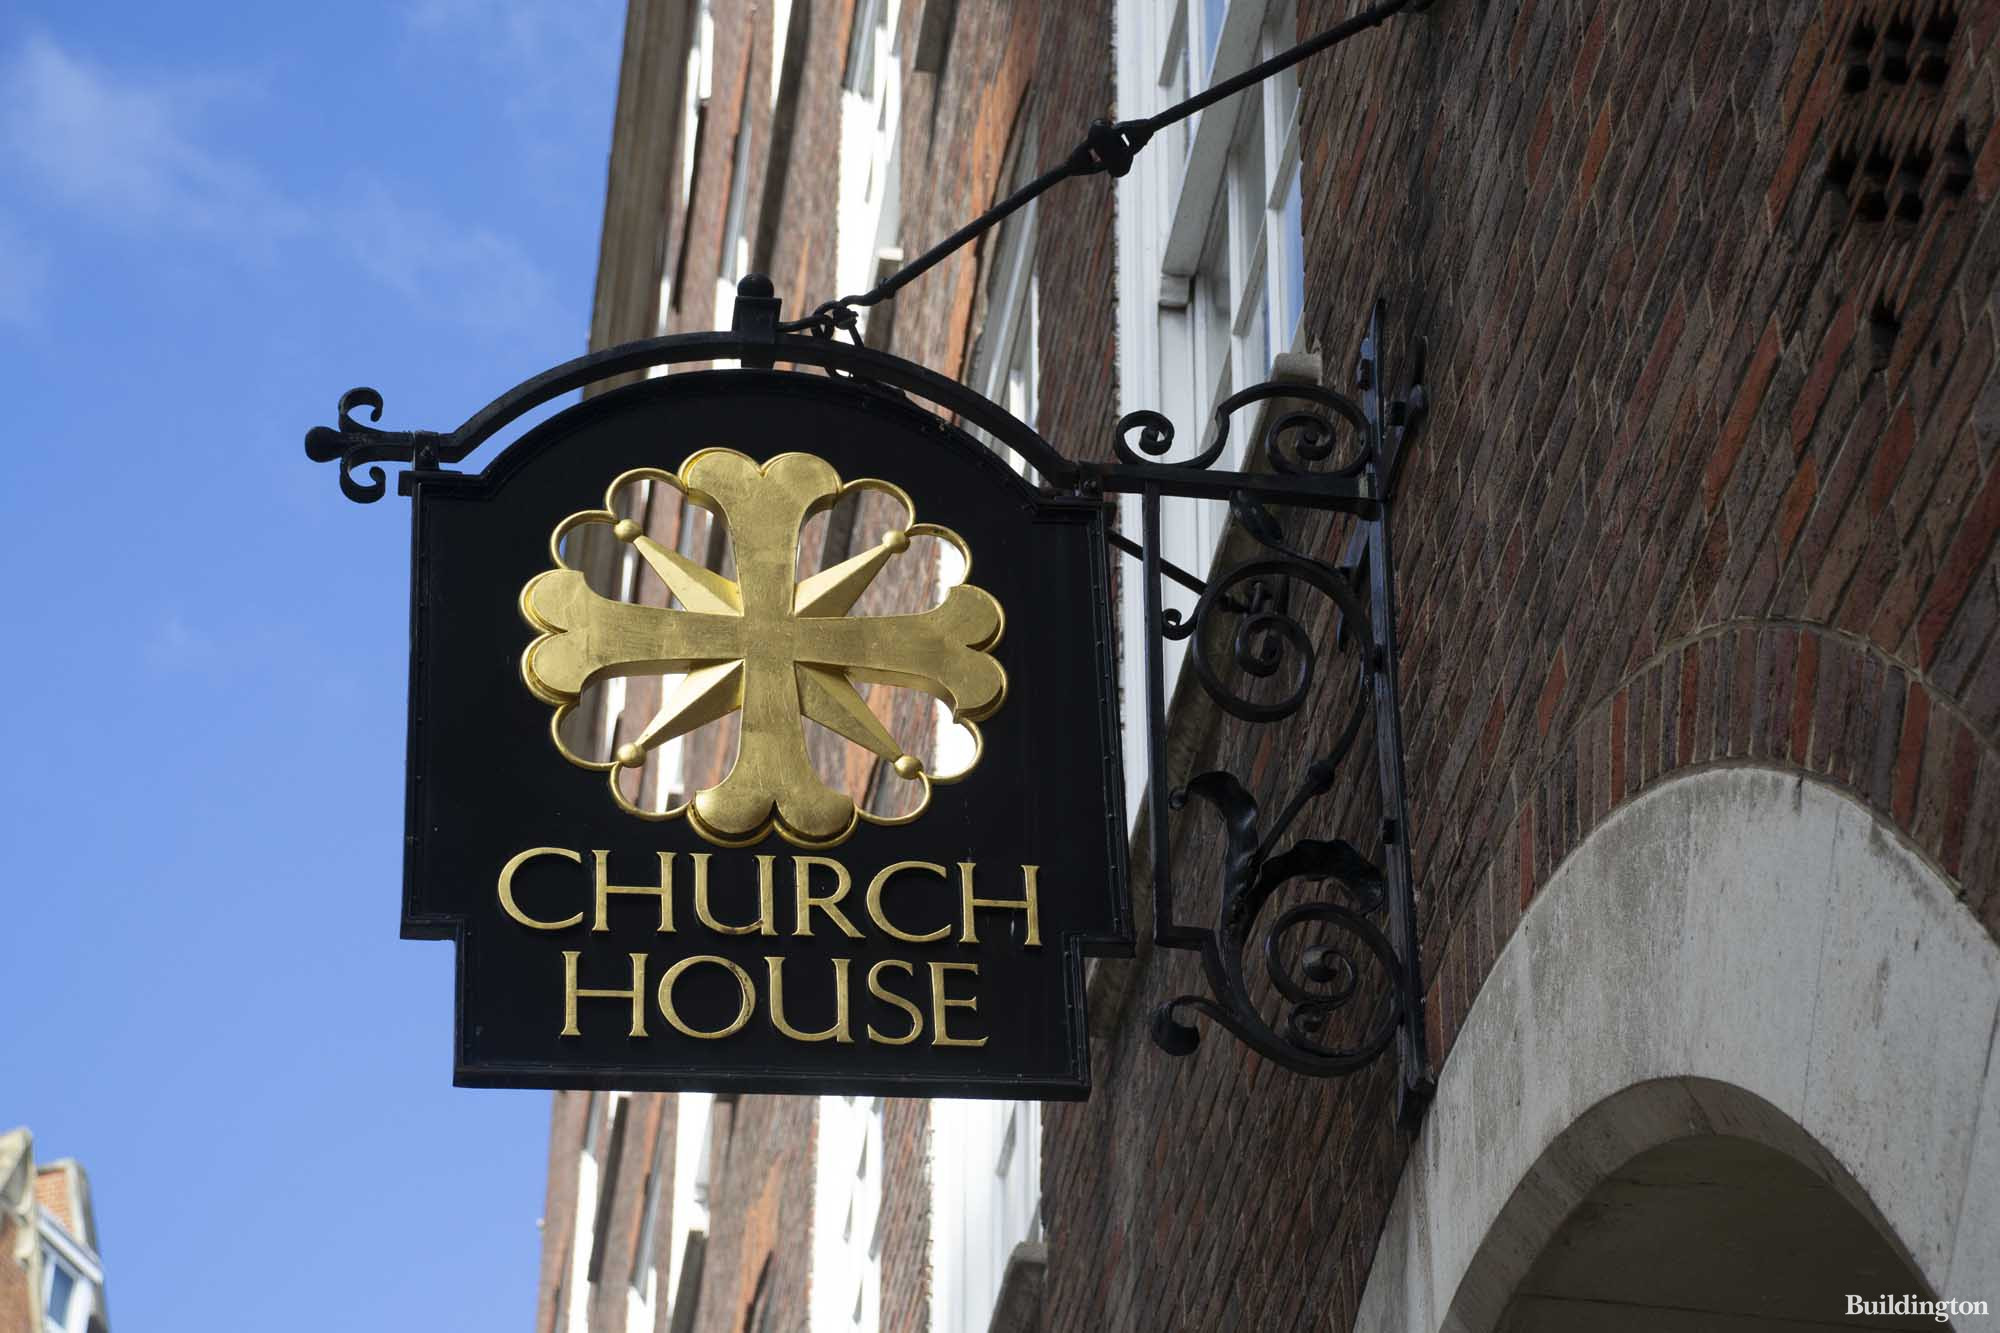 Church House signage on Great Smith Street in Westminster, London SW1.